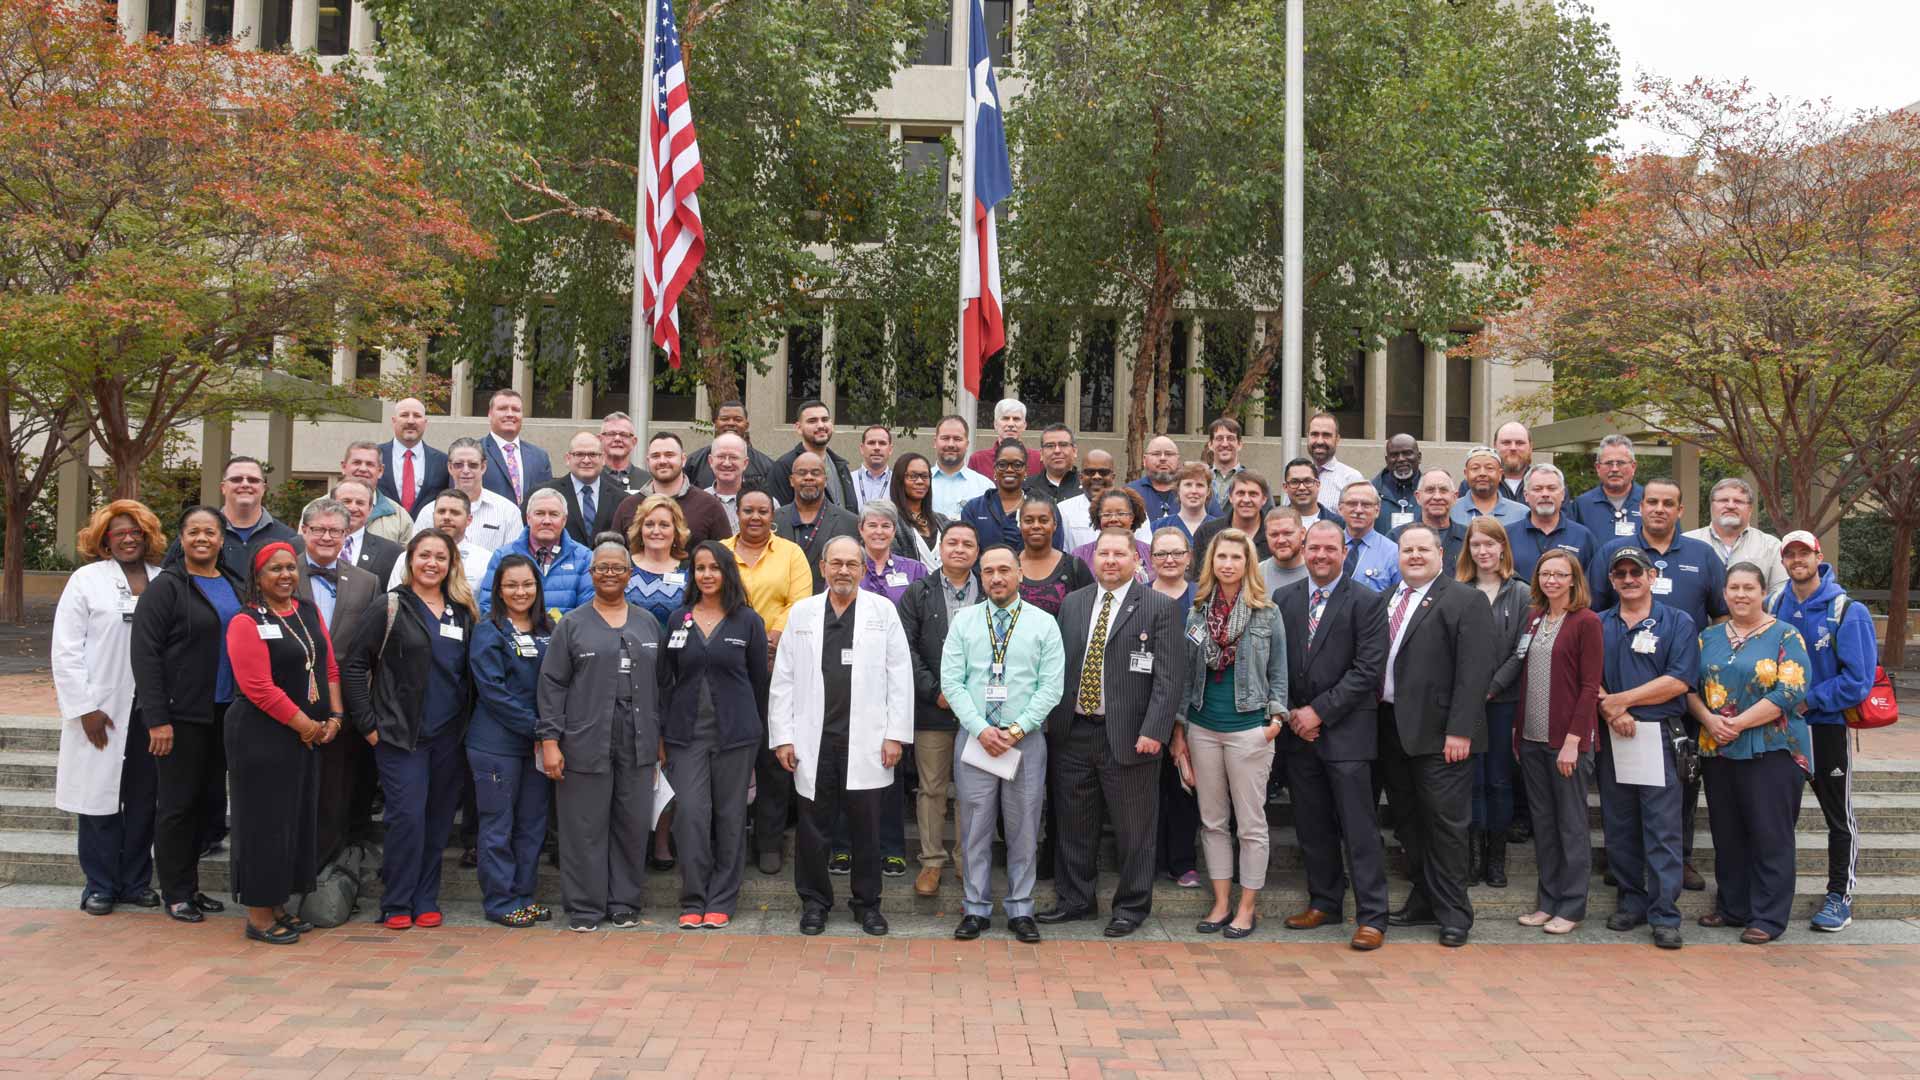 UT Southwestern employees who served in the military pose for a group photo